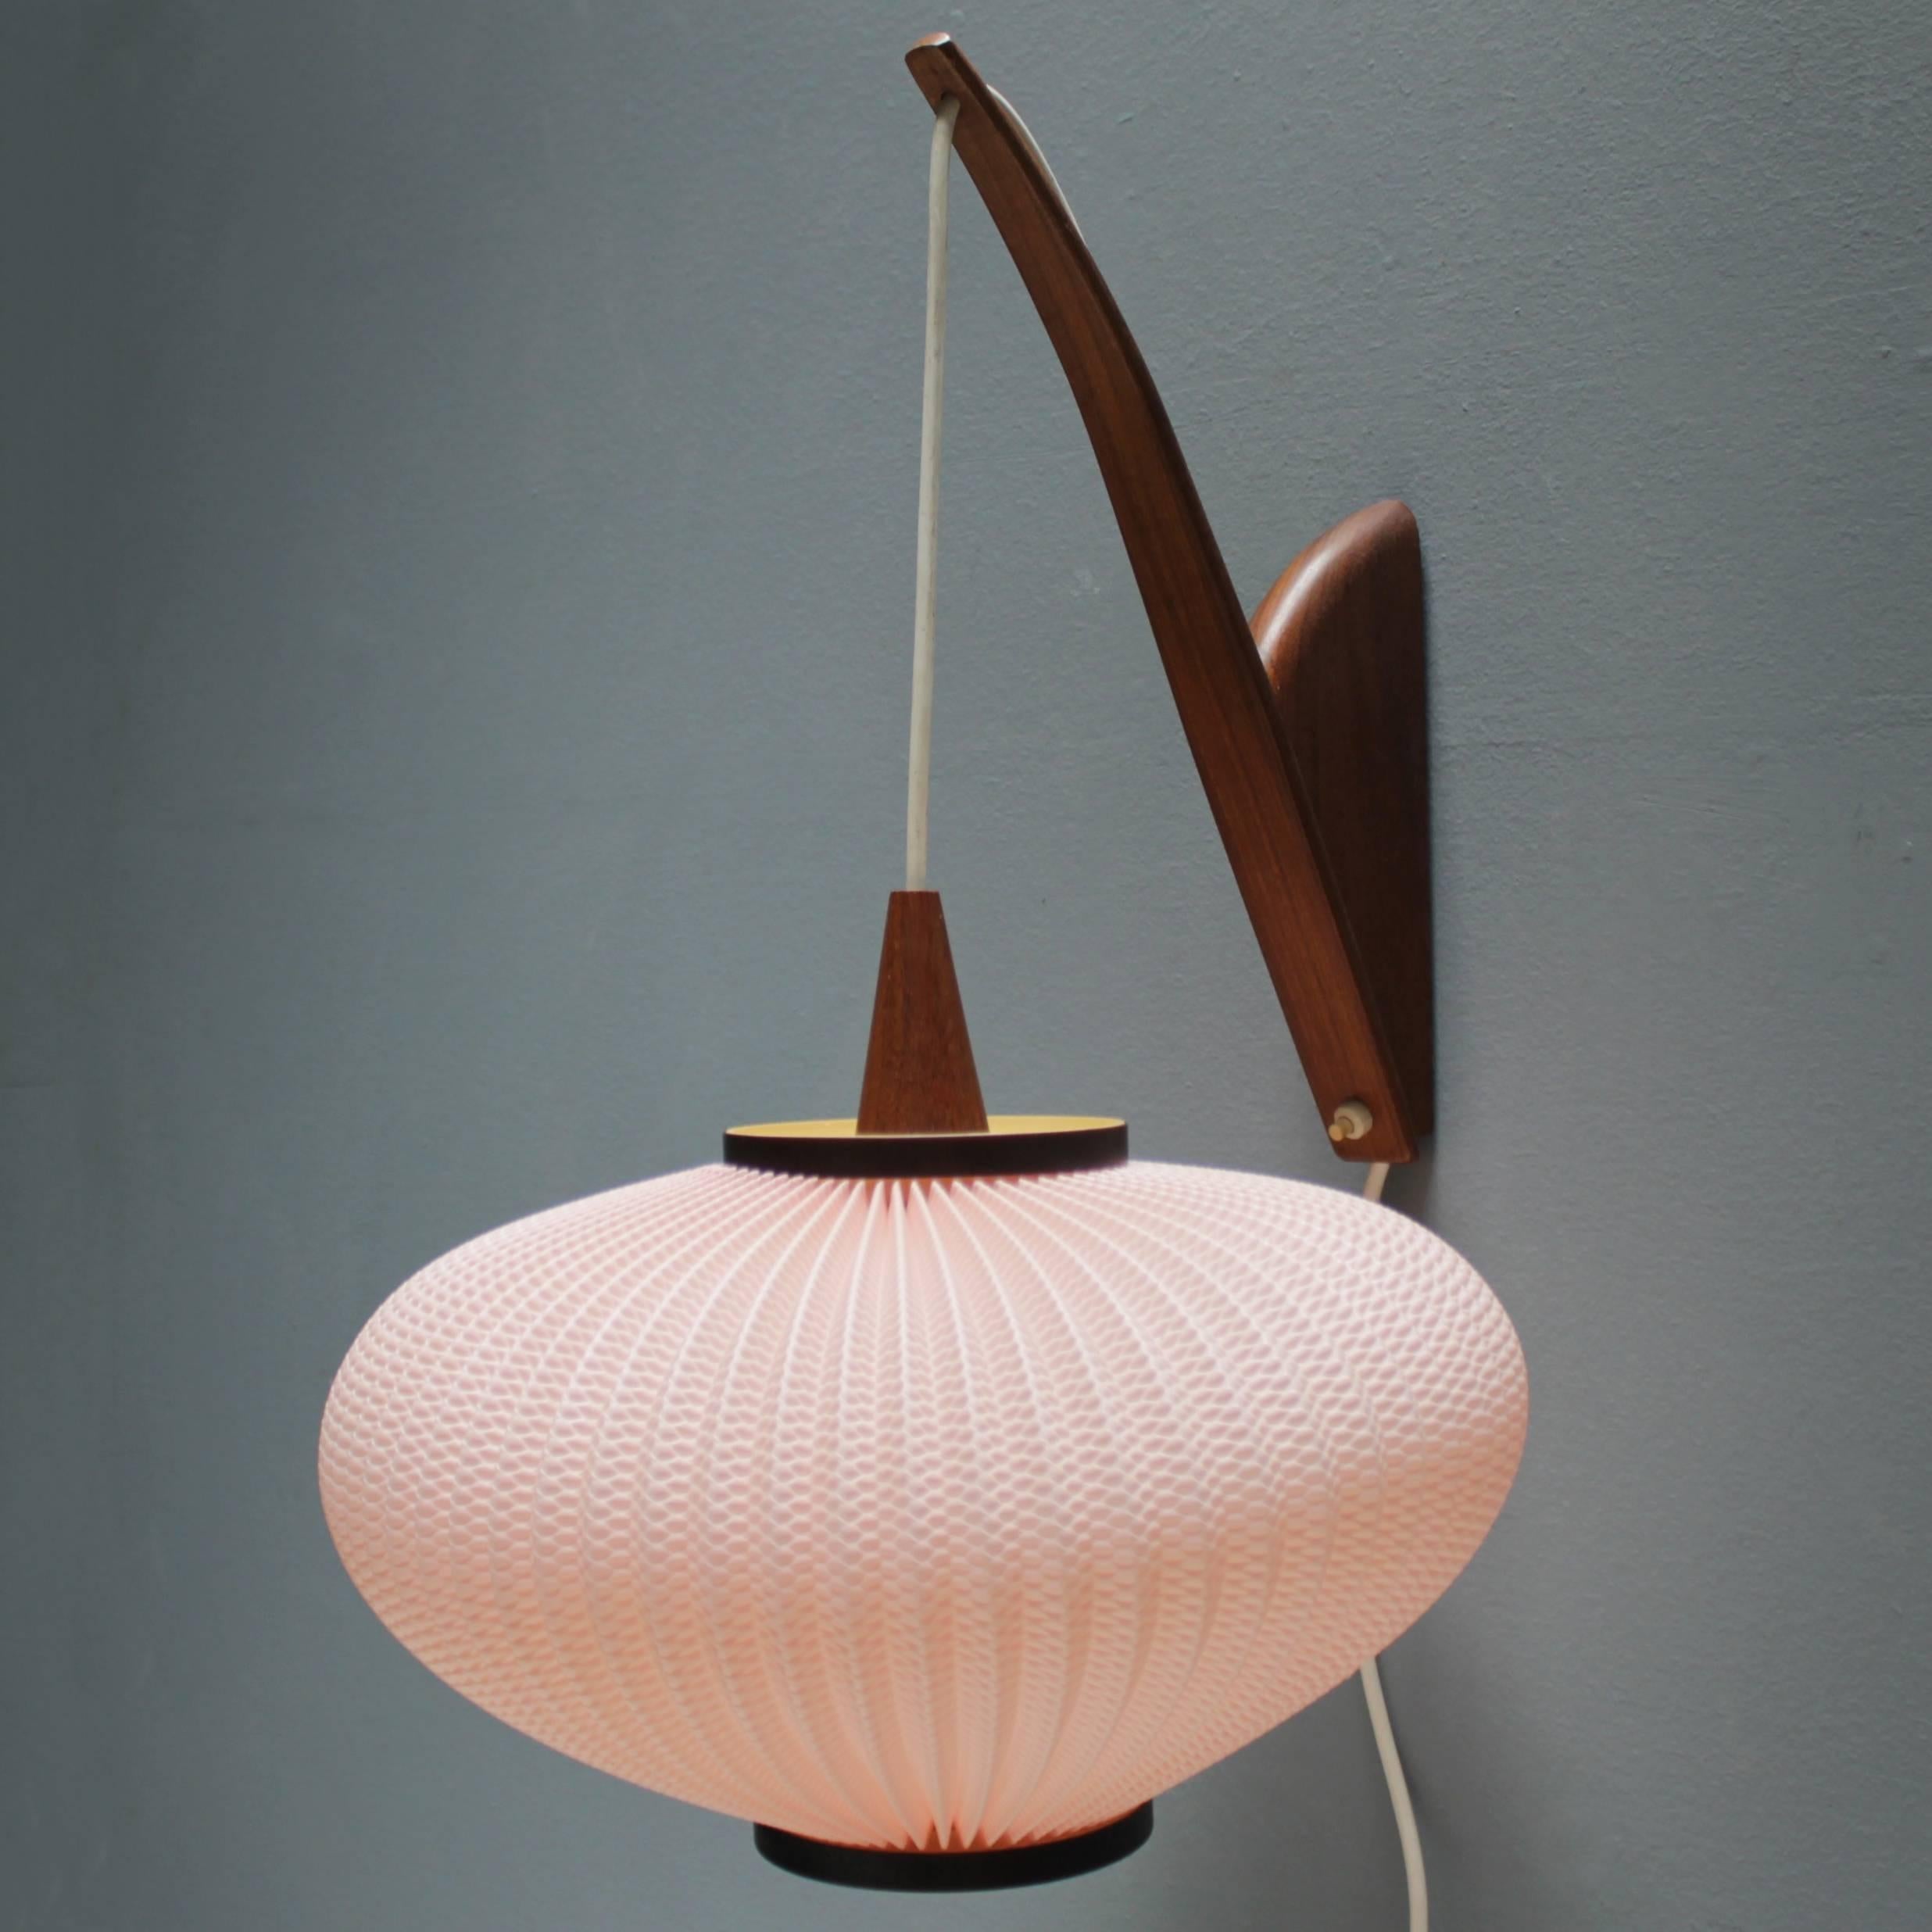 Danish lamp by Lars Schiøler, in walnut and celluloid (rhodoïd). Same kind of shade as the French lights of Rispal. Beautiful condition. One socket (E27 26-27 mm (medium) Edison screw (ES). Max. 40 Watt. The wire and socket are in a good